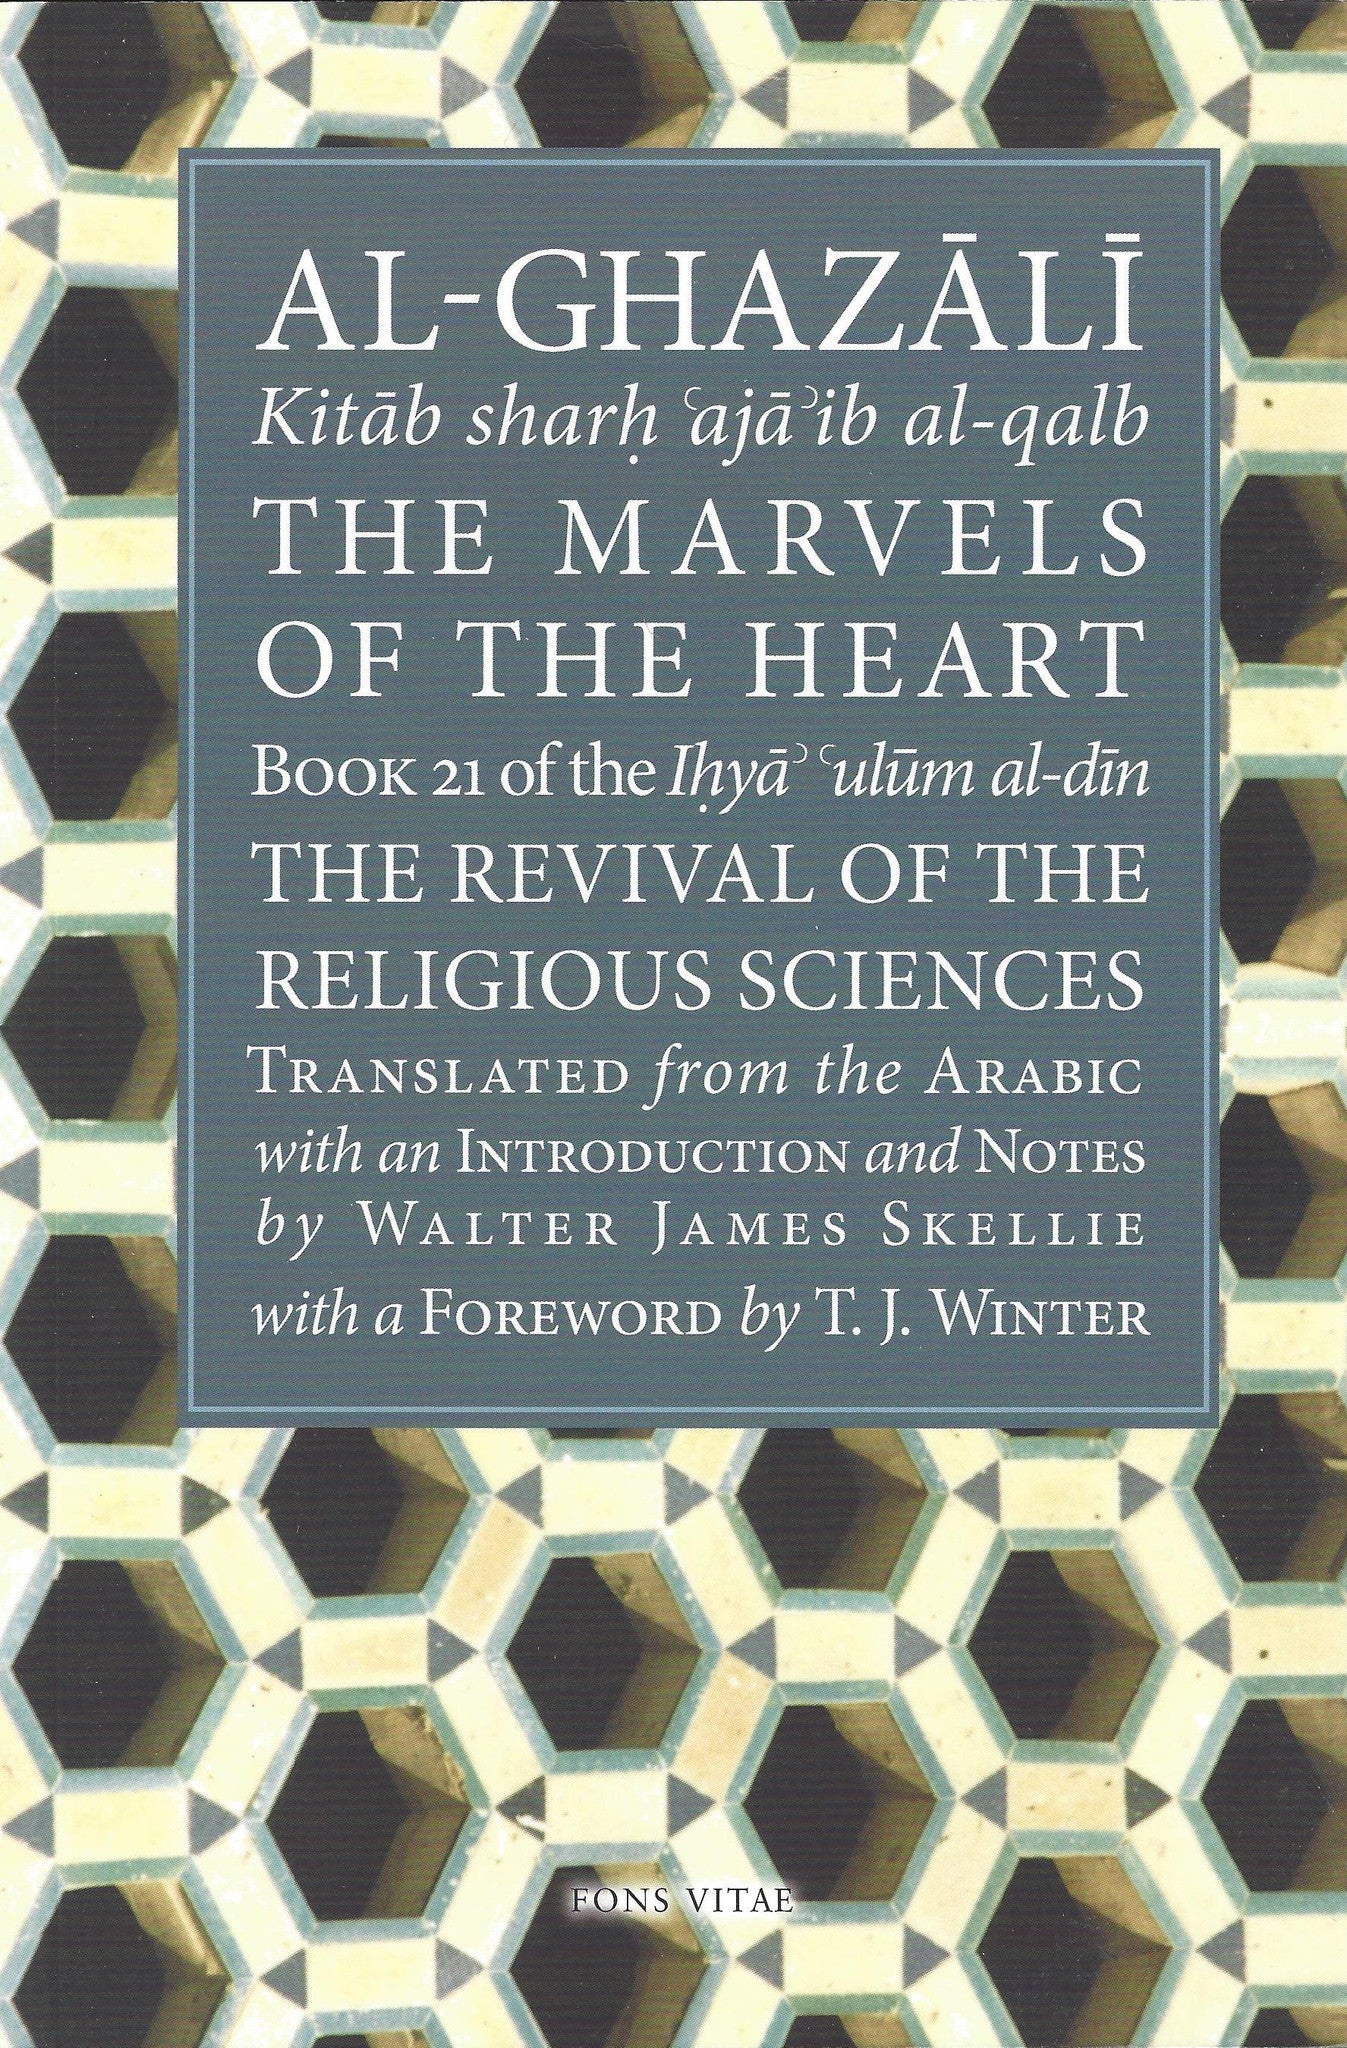 The Marvels of the Heart: Science of the Spirit (Ihya Ulum Al-Din/ the Revival of the Religious Sciences) , Book - Daybreak International Bookstore, Daybreak Press Global Bookshop
